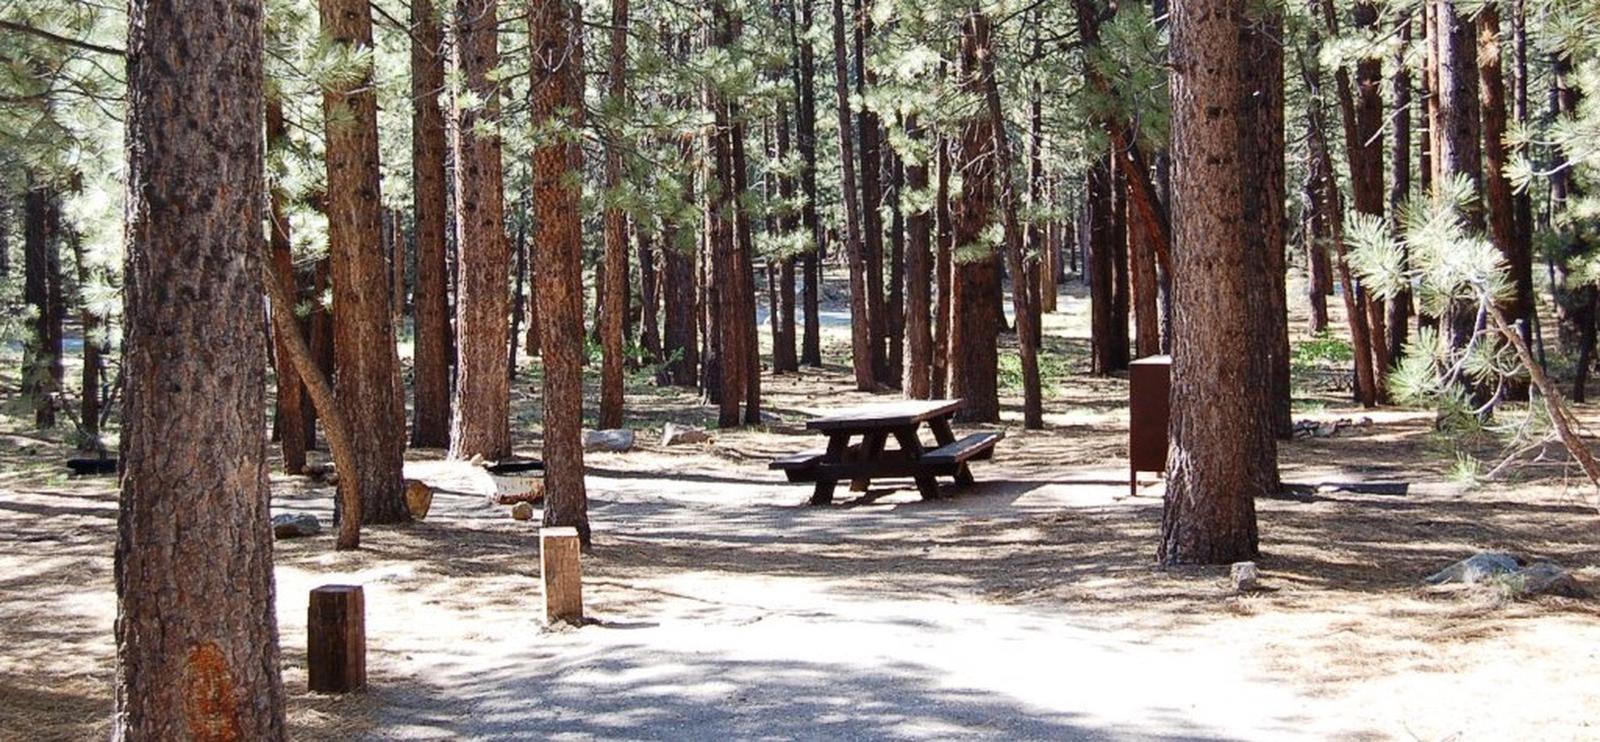 Camper submitted image from Old Shady Rest Campground - 1